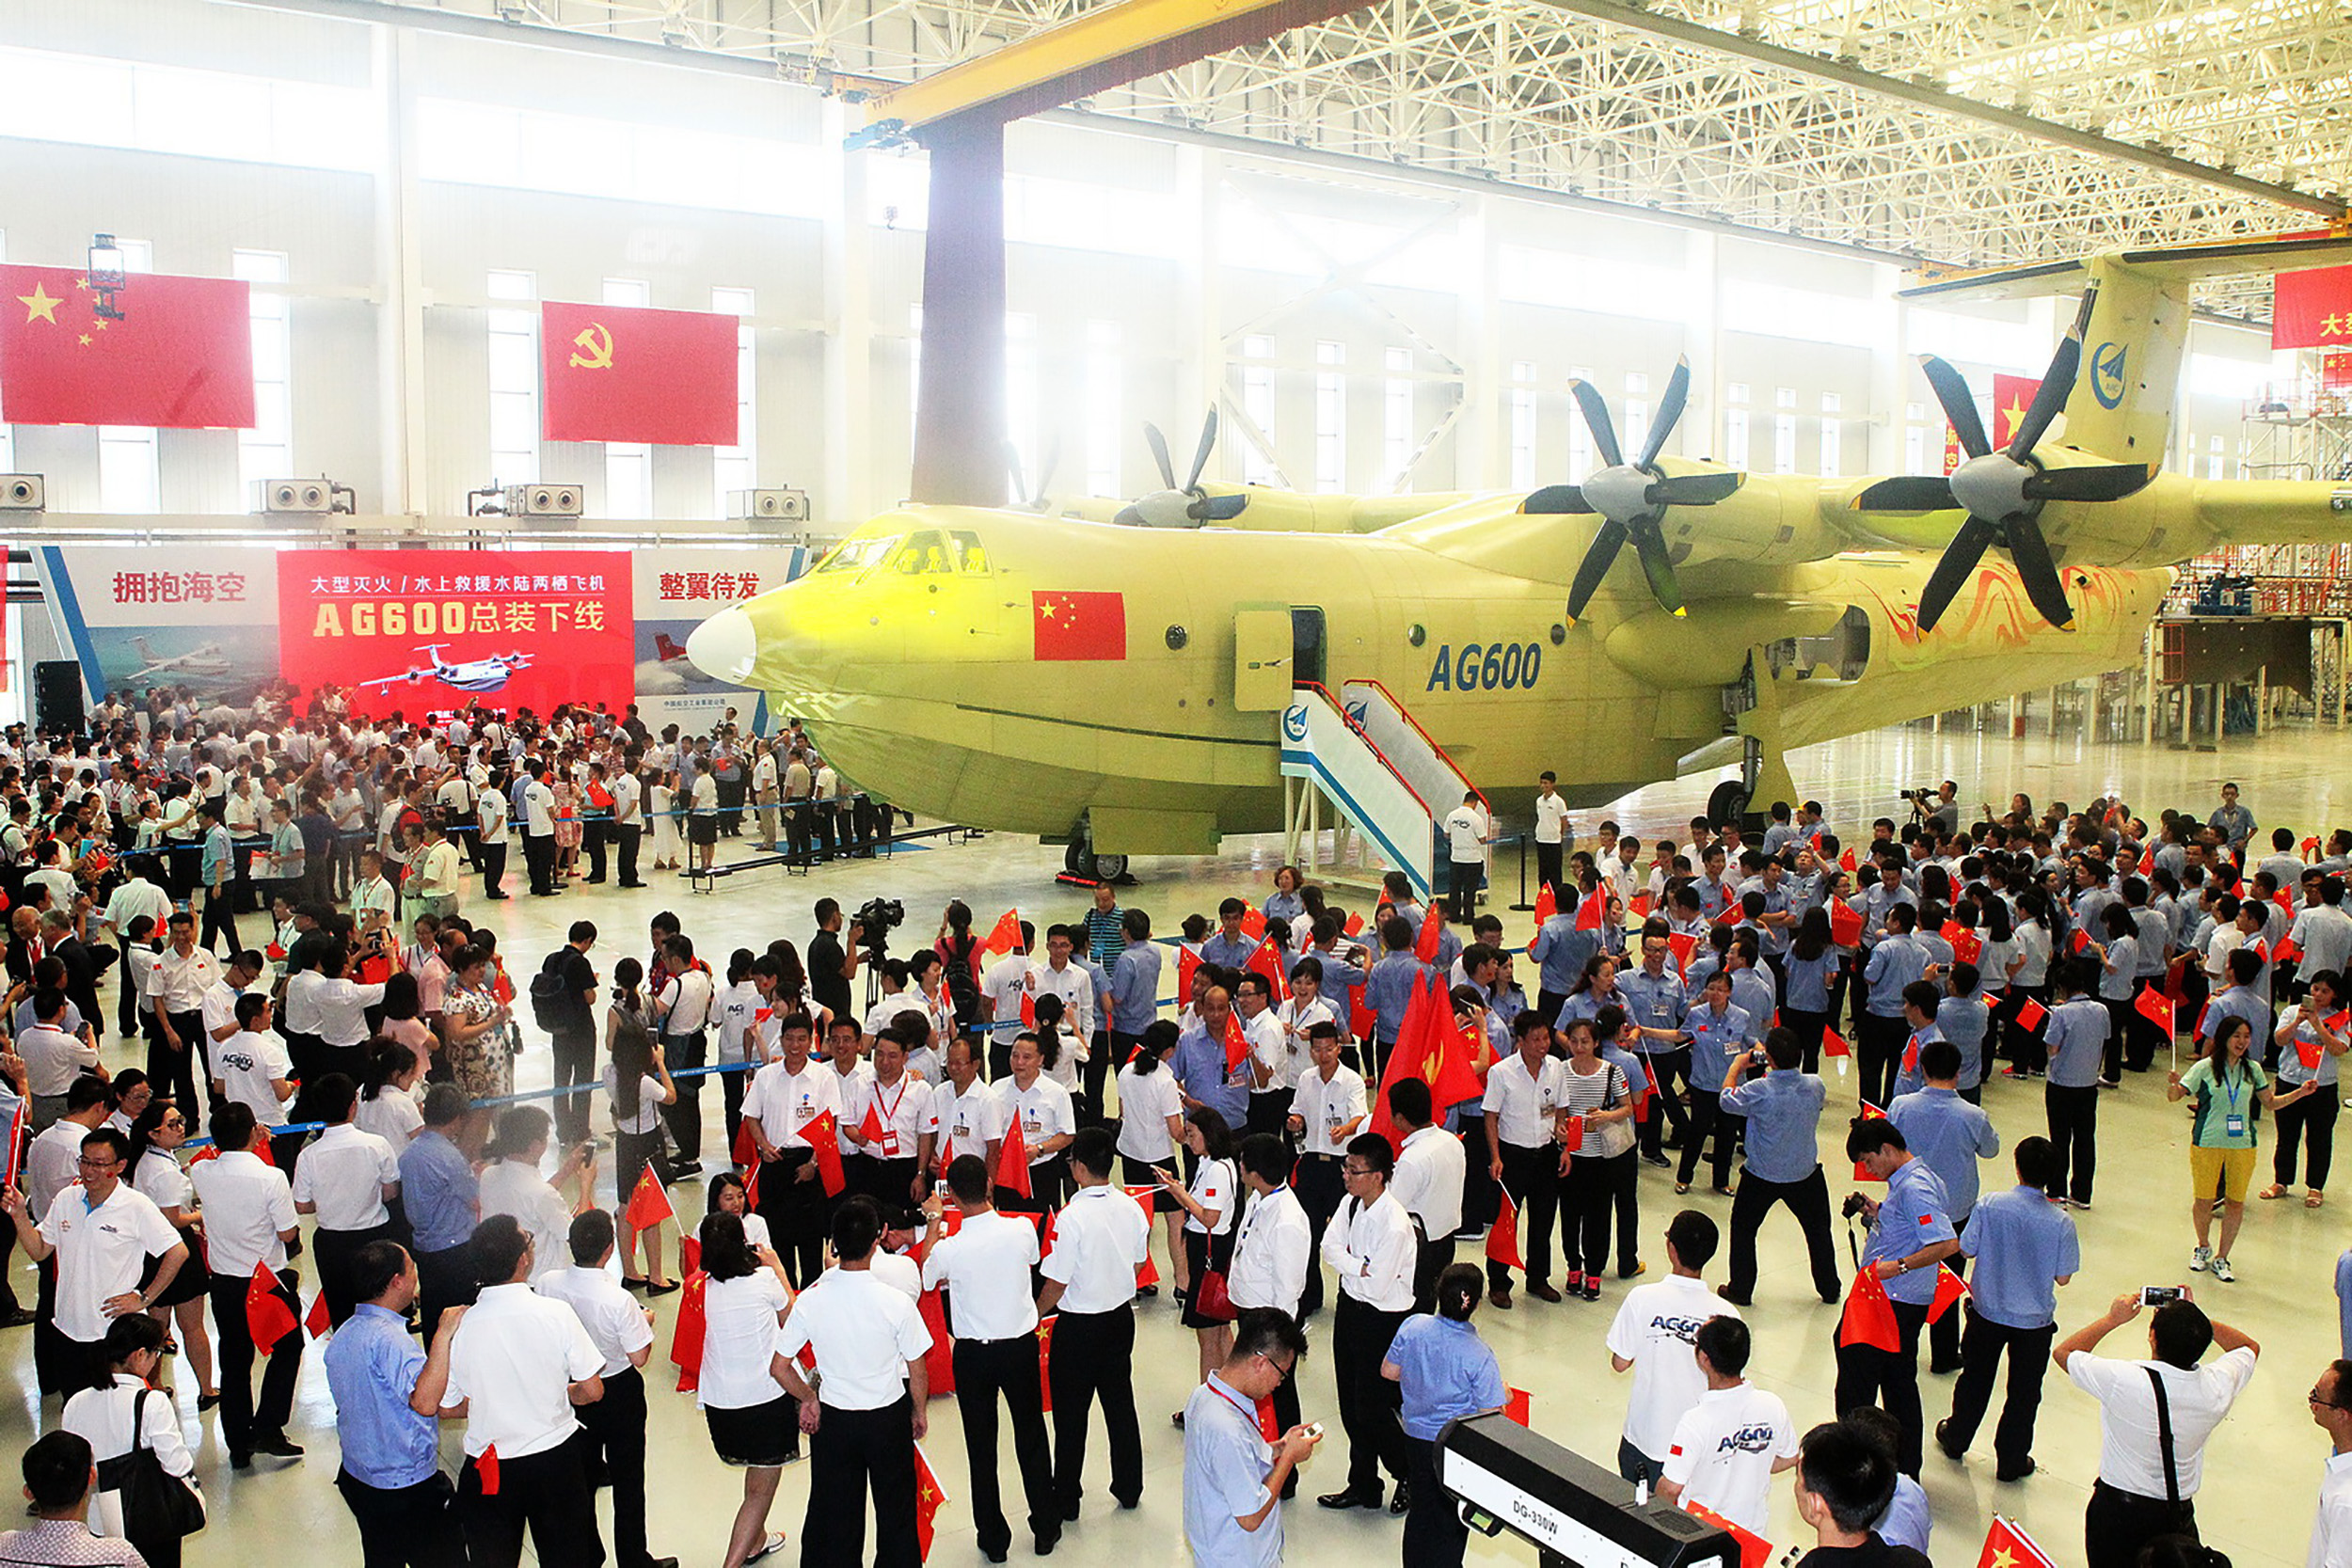 This picture taken on July 23, 2016 shows a crowd at a ceremony to unveil the AG600 amphibious plane in Zhuhai, in south China's Guangdong Province. China has completed production of the world's largest amphibious aircraft, state media has said, the latest effort in the country's program to wean itself off dependence on foreign aviation firms. / AFP PHOTO / STR / China OUT